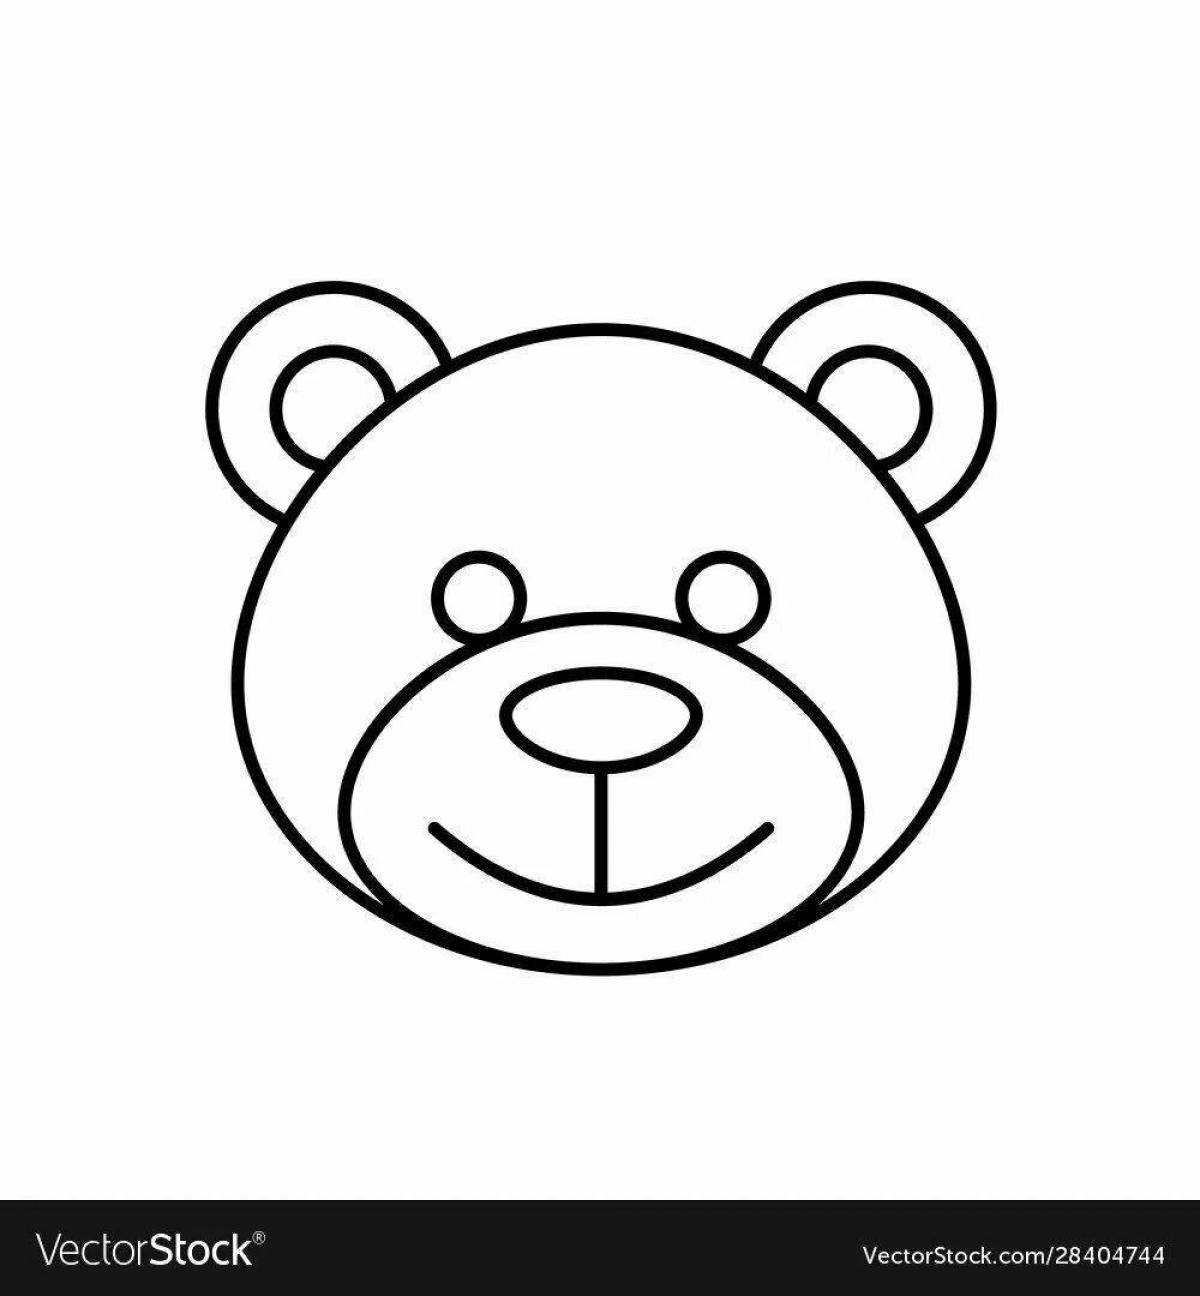 Round bear face coloring page